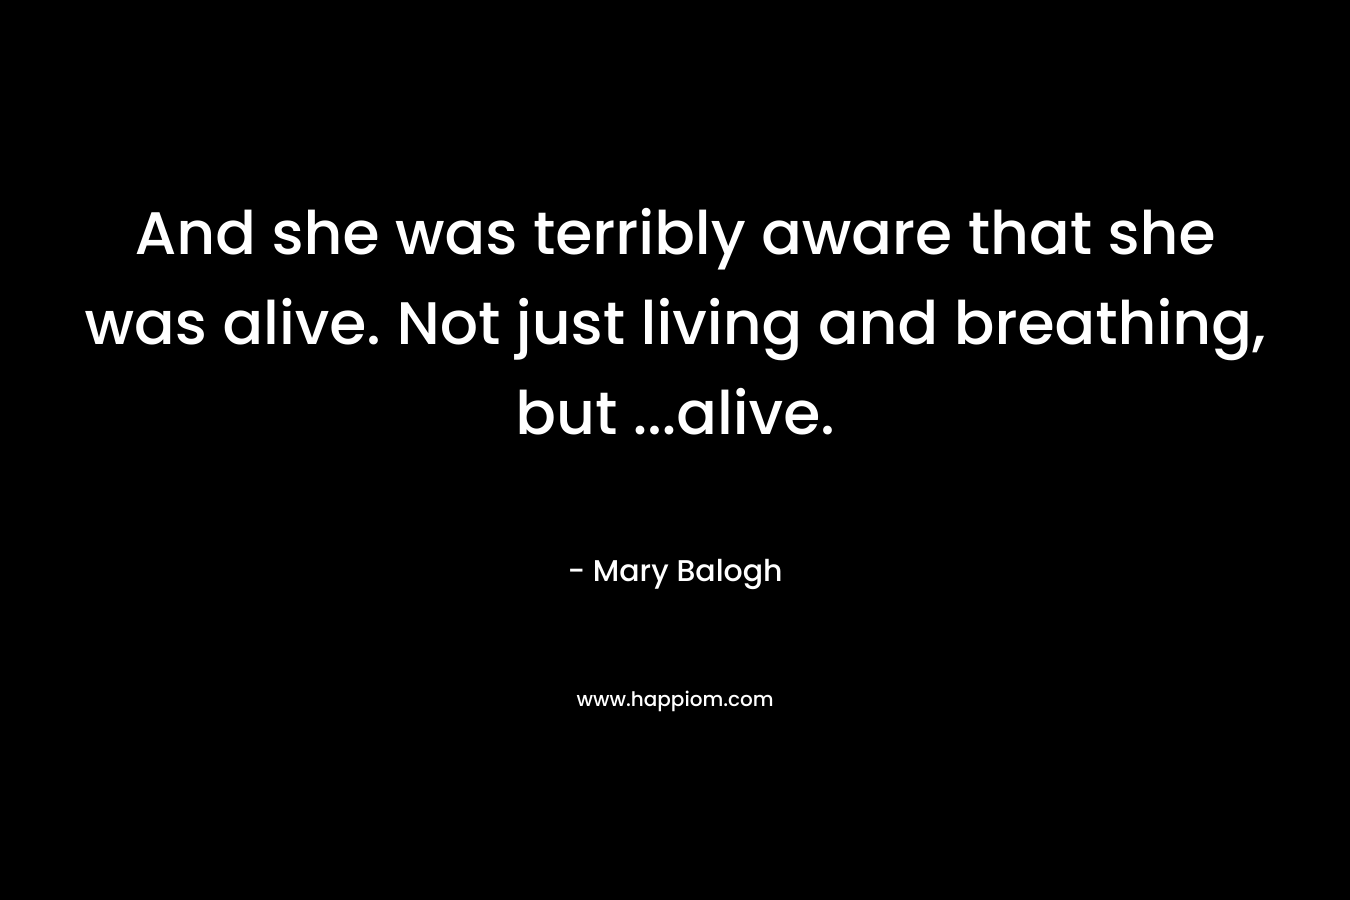 And she was terribly aware that she was alive. Not just living and breathing, but ...alive.